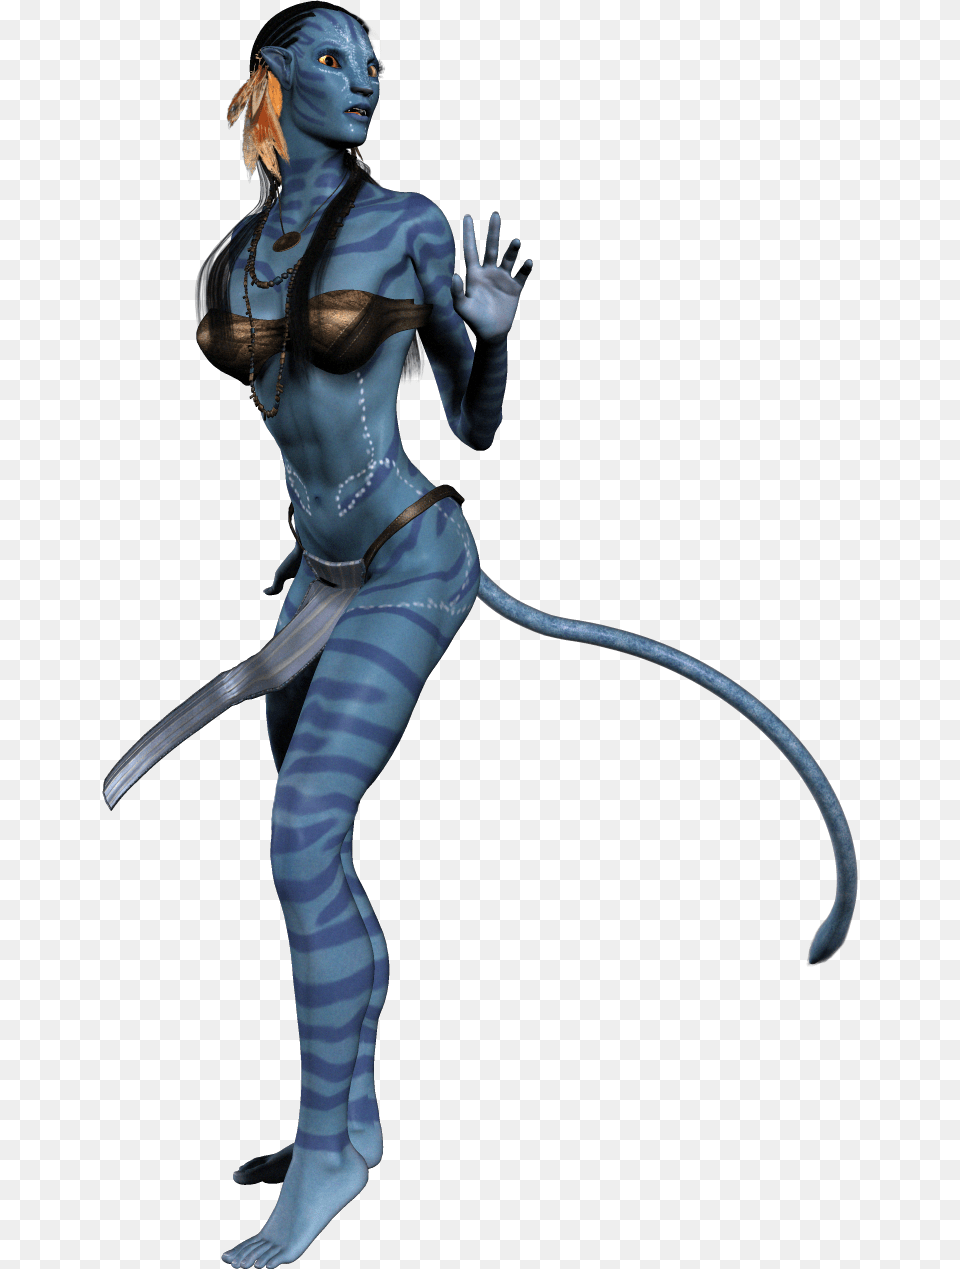 Avatar Neytiri Image Jake Sully, Adult, Female, Person, Woman Png